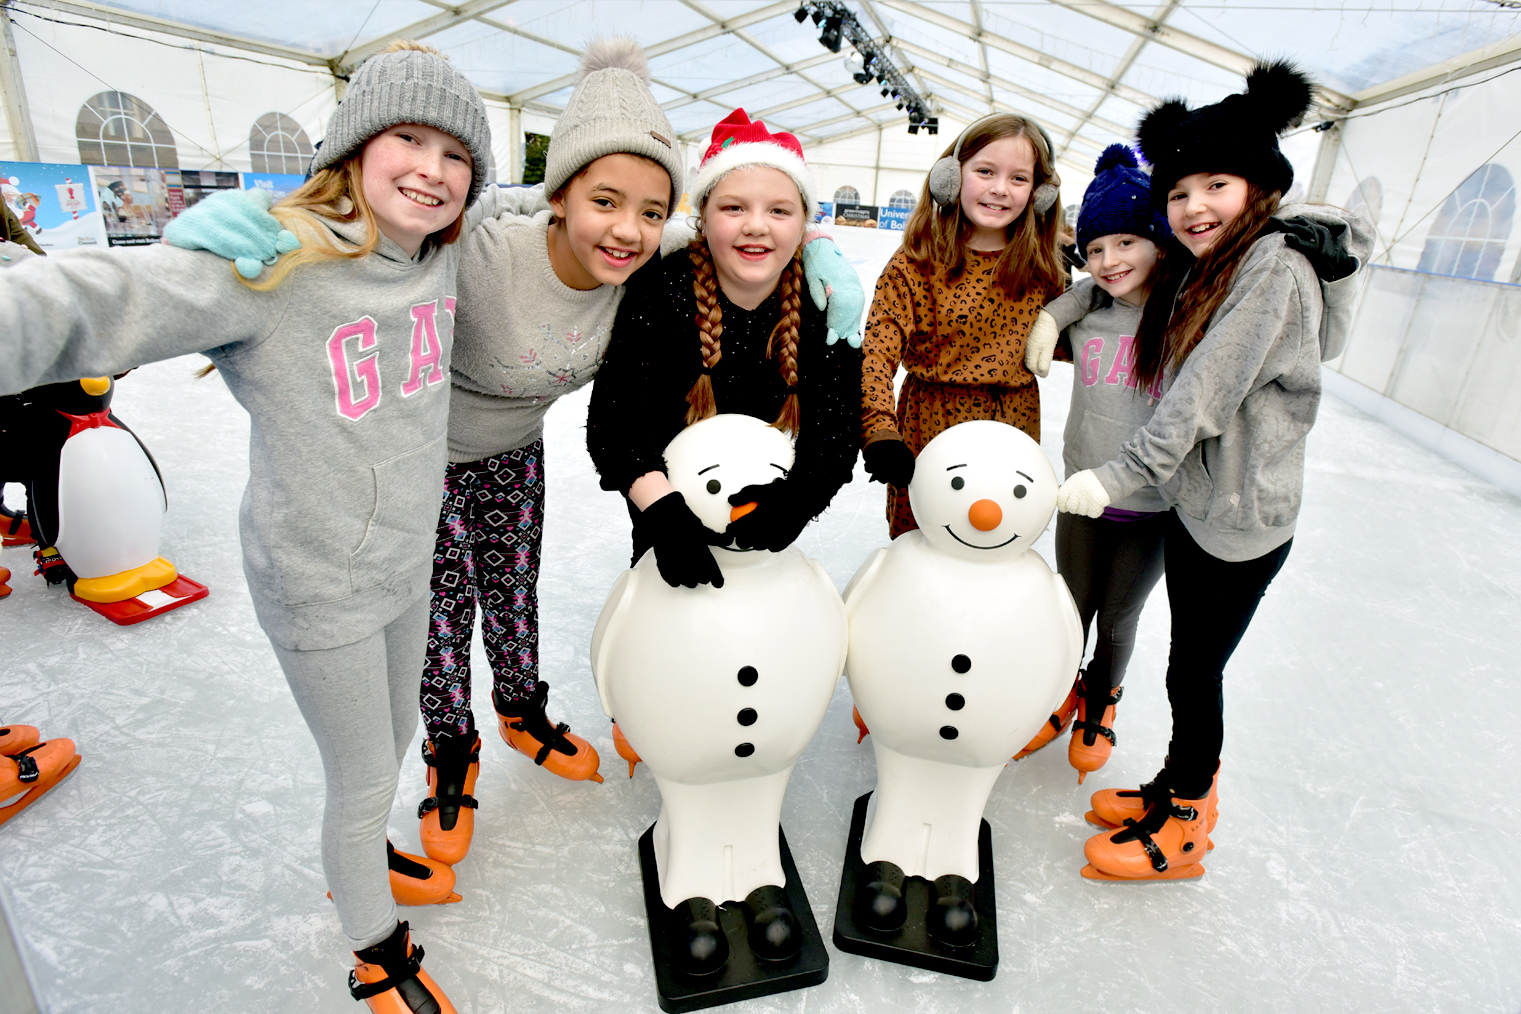 Baby it's cold in here! Ice rink opens its doors